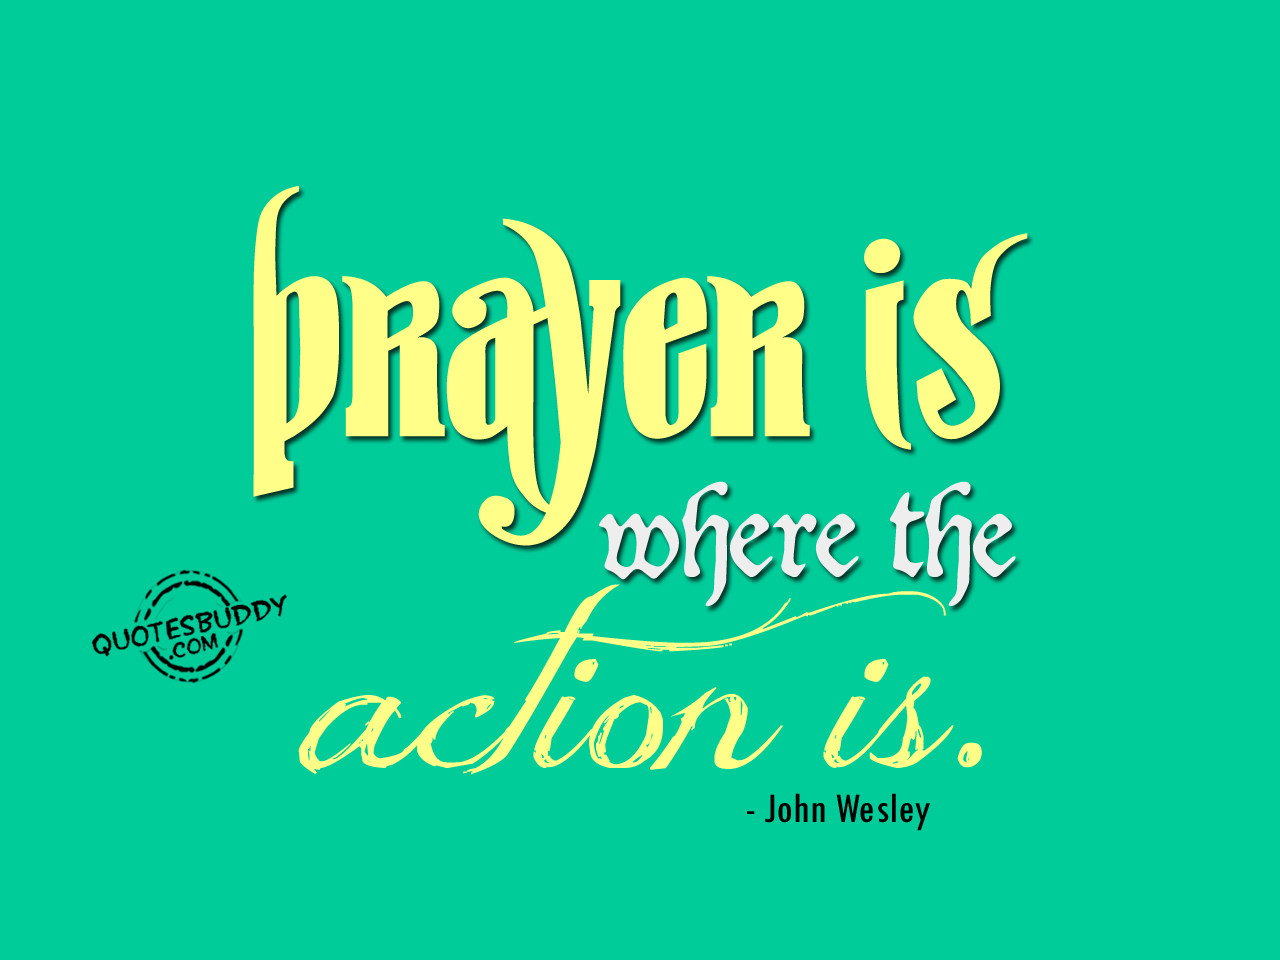 Prayer is where the action is. John Wesley